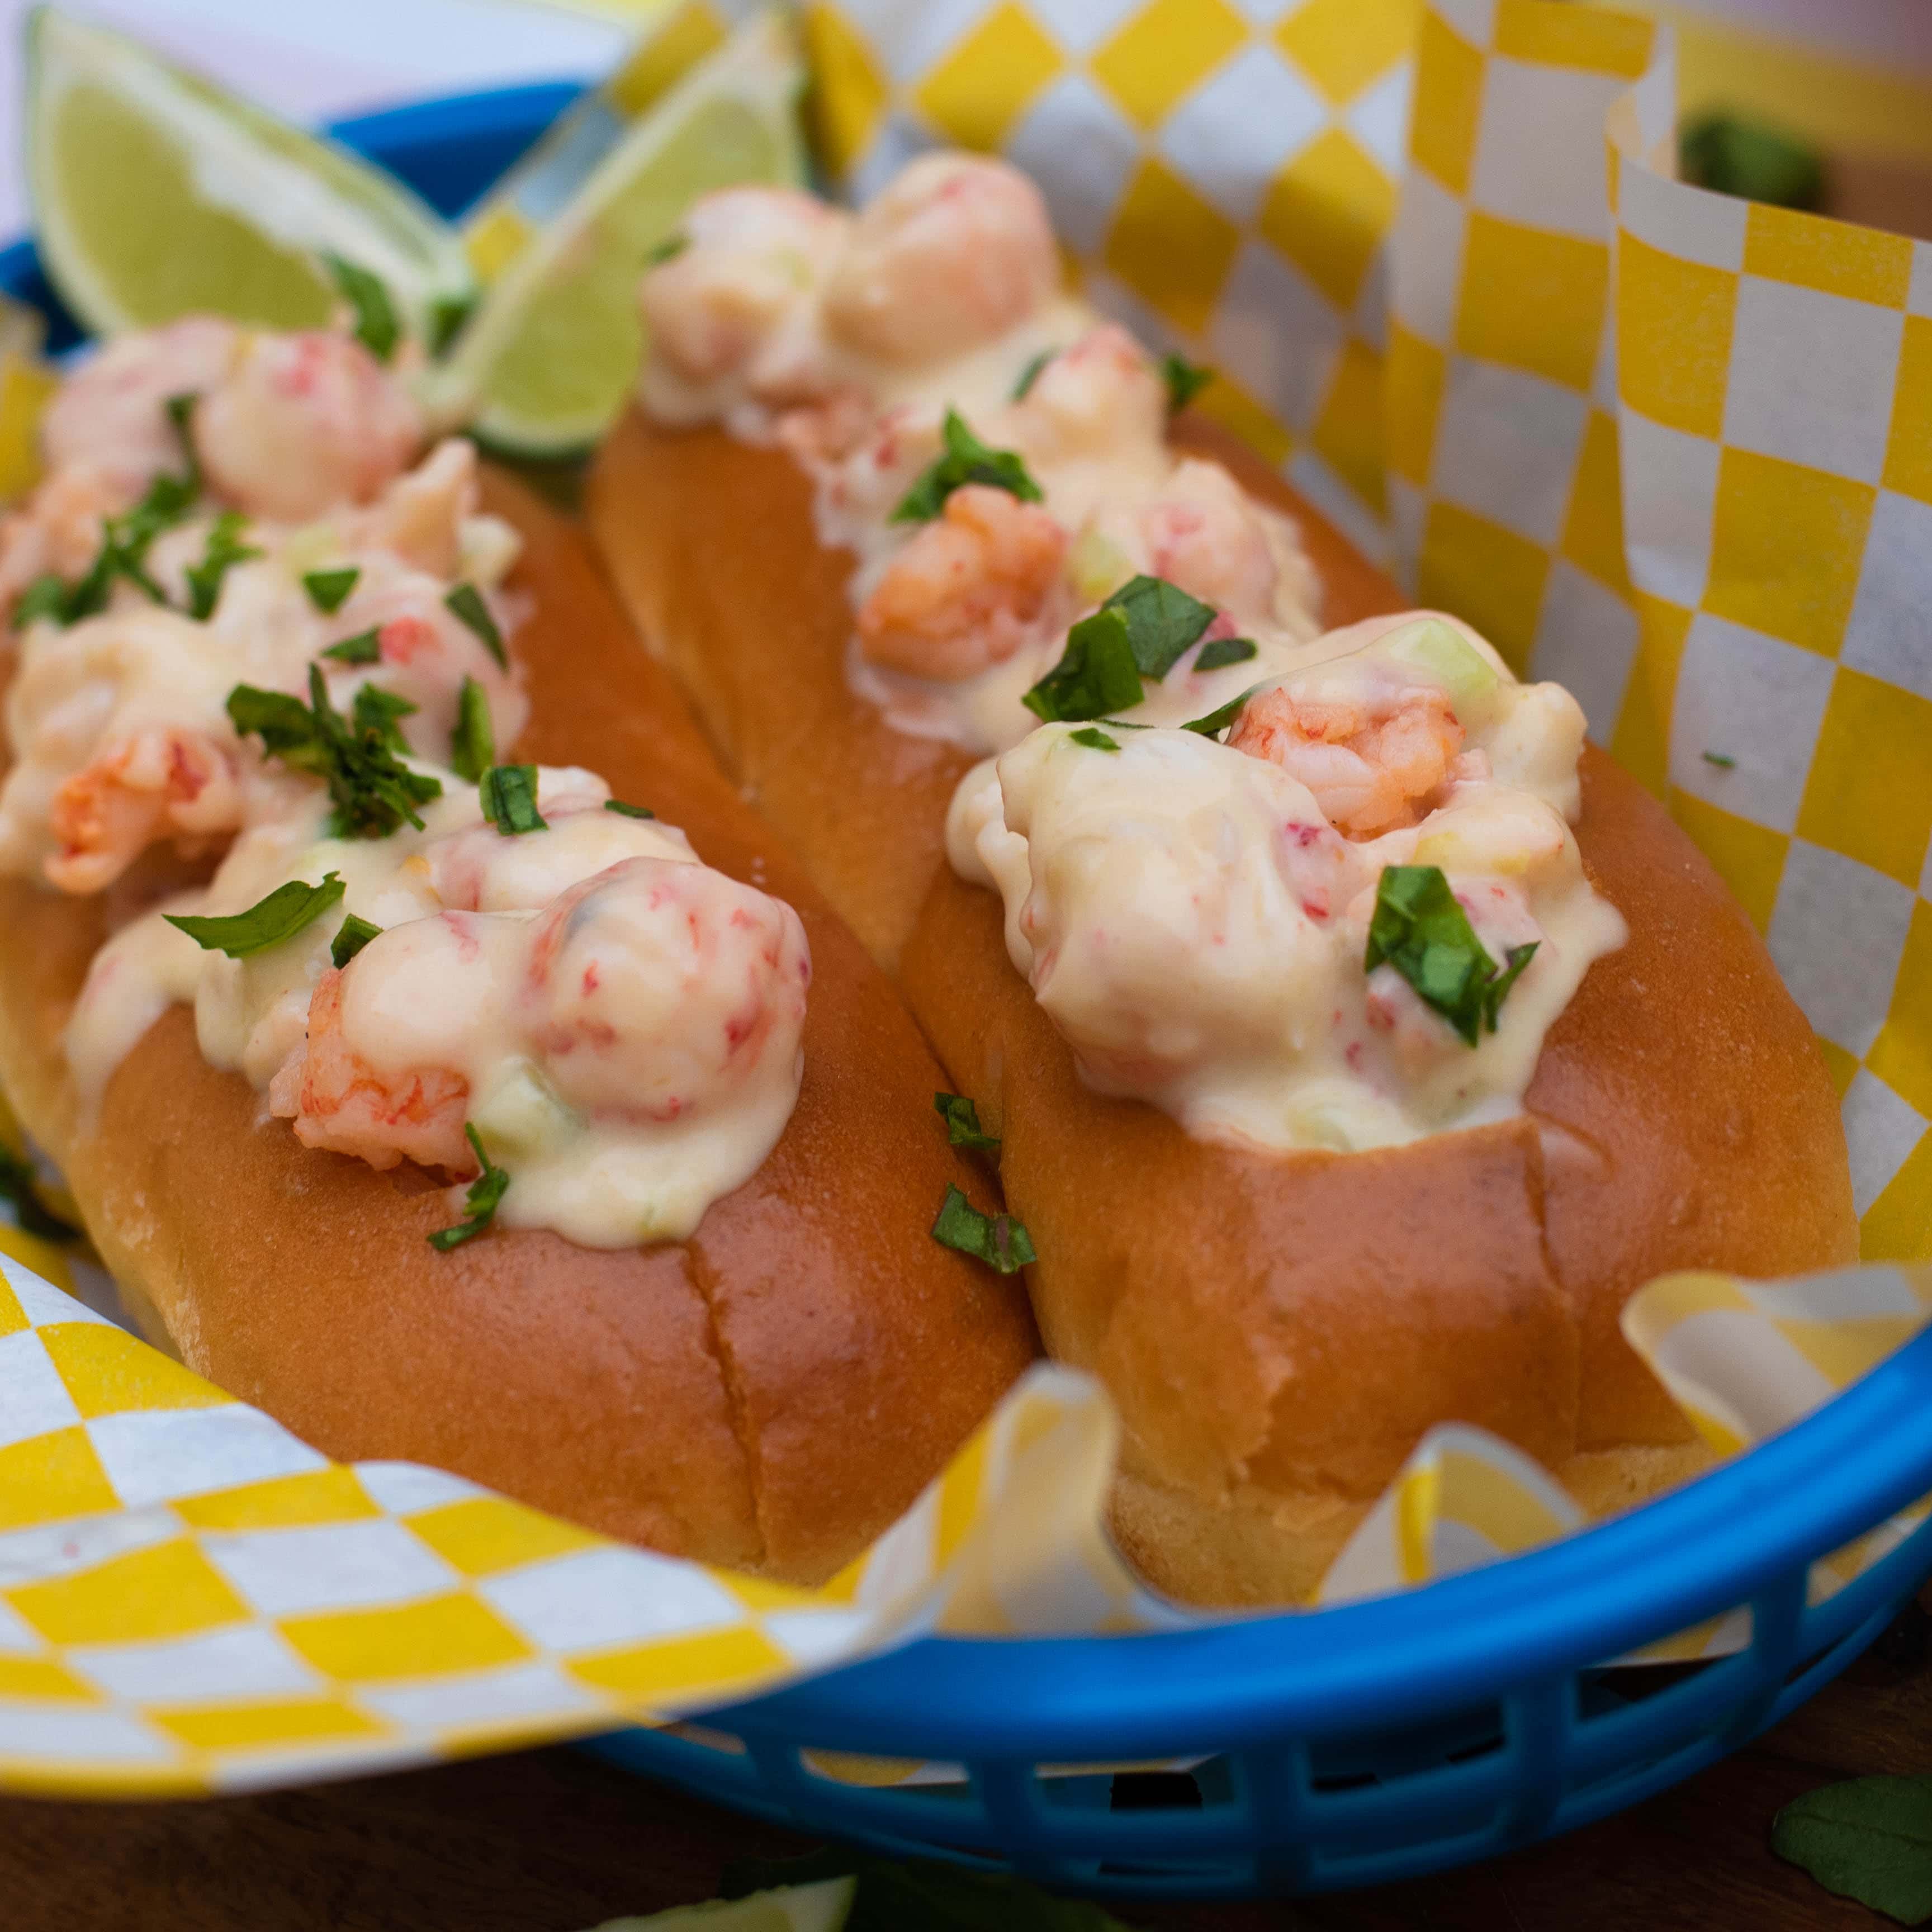 Originally I prepared these green chile lobster rolls to celebrate July 4th, but they're good as a Memorial Day recipe too.